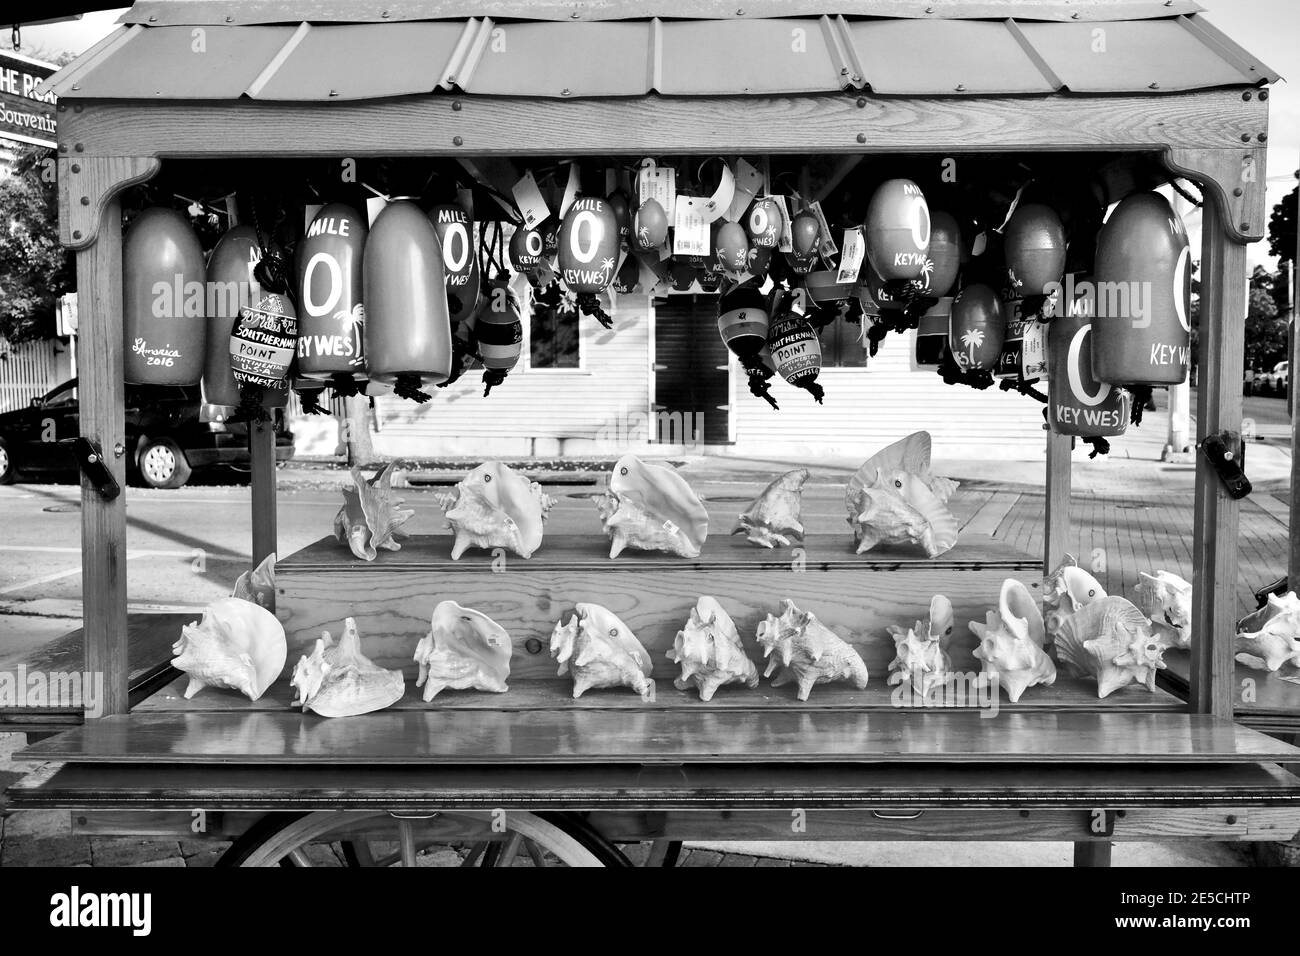 Souvenir cart selling Conch Shells in Key West, Florida, FL USA.  Southern most point in the continental USA.  Island vacation destination. Stock Photo